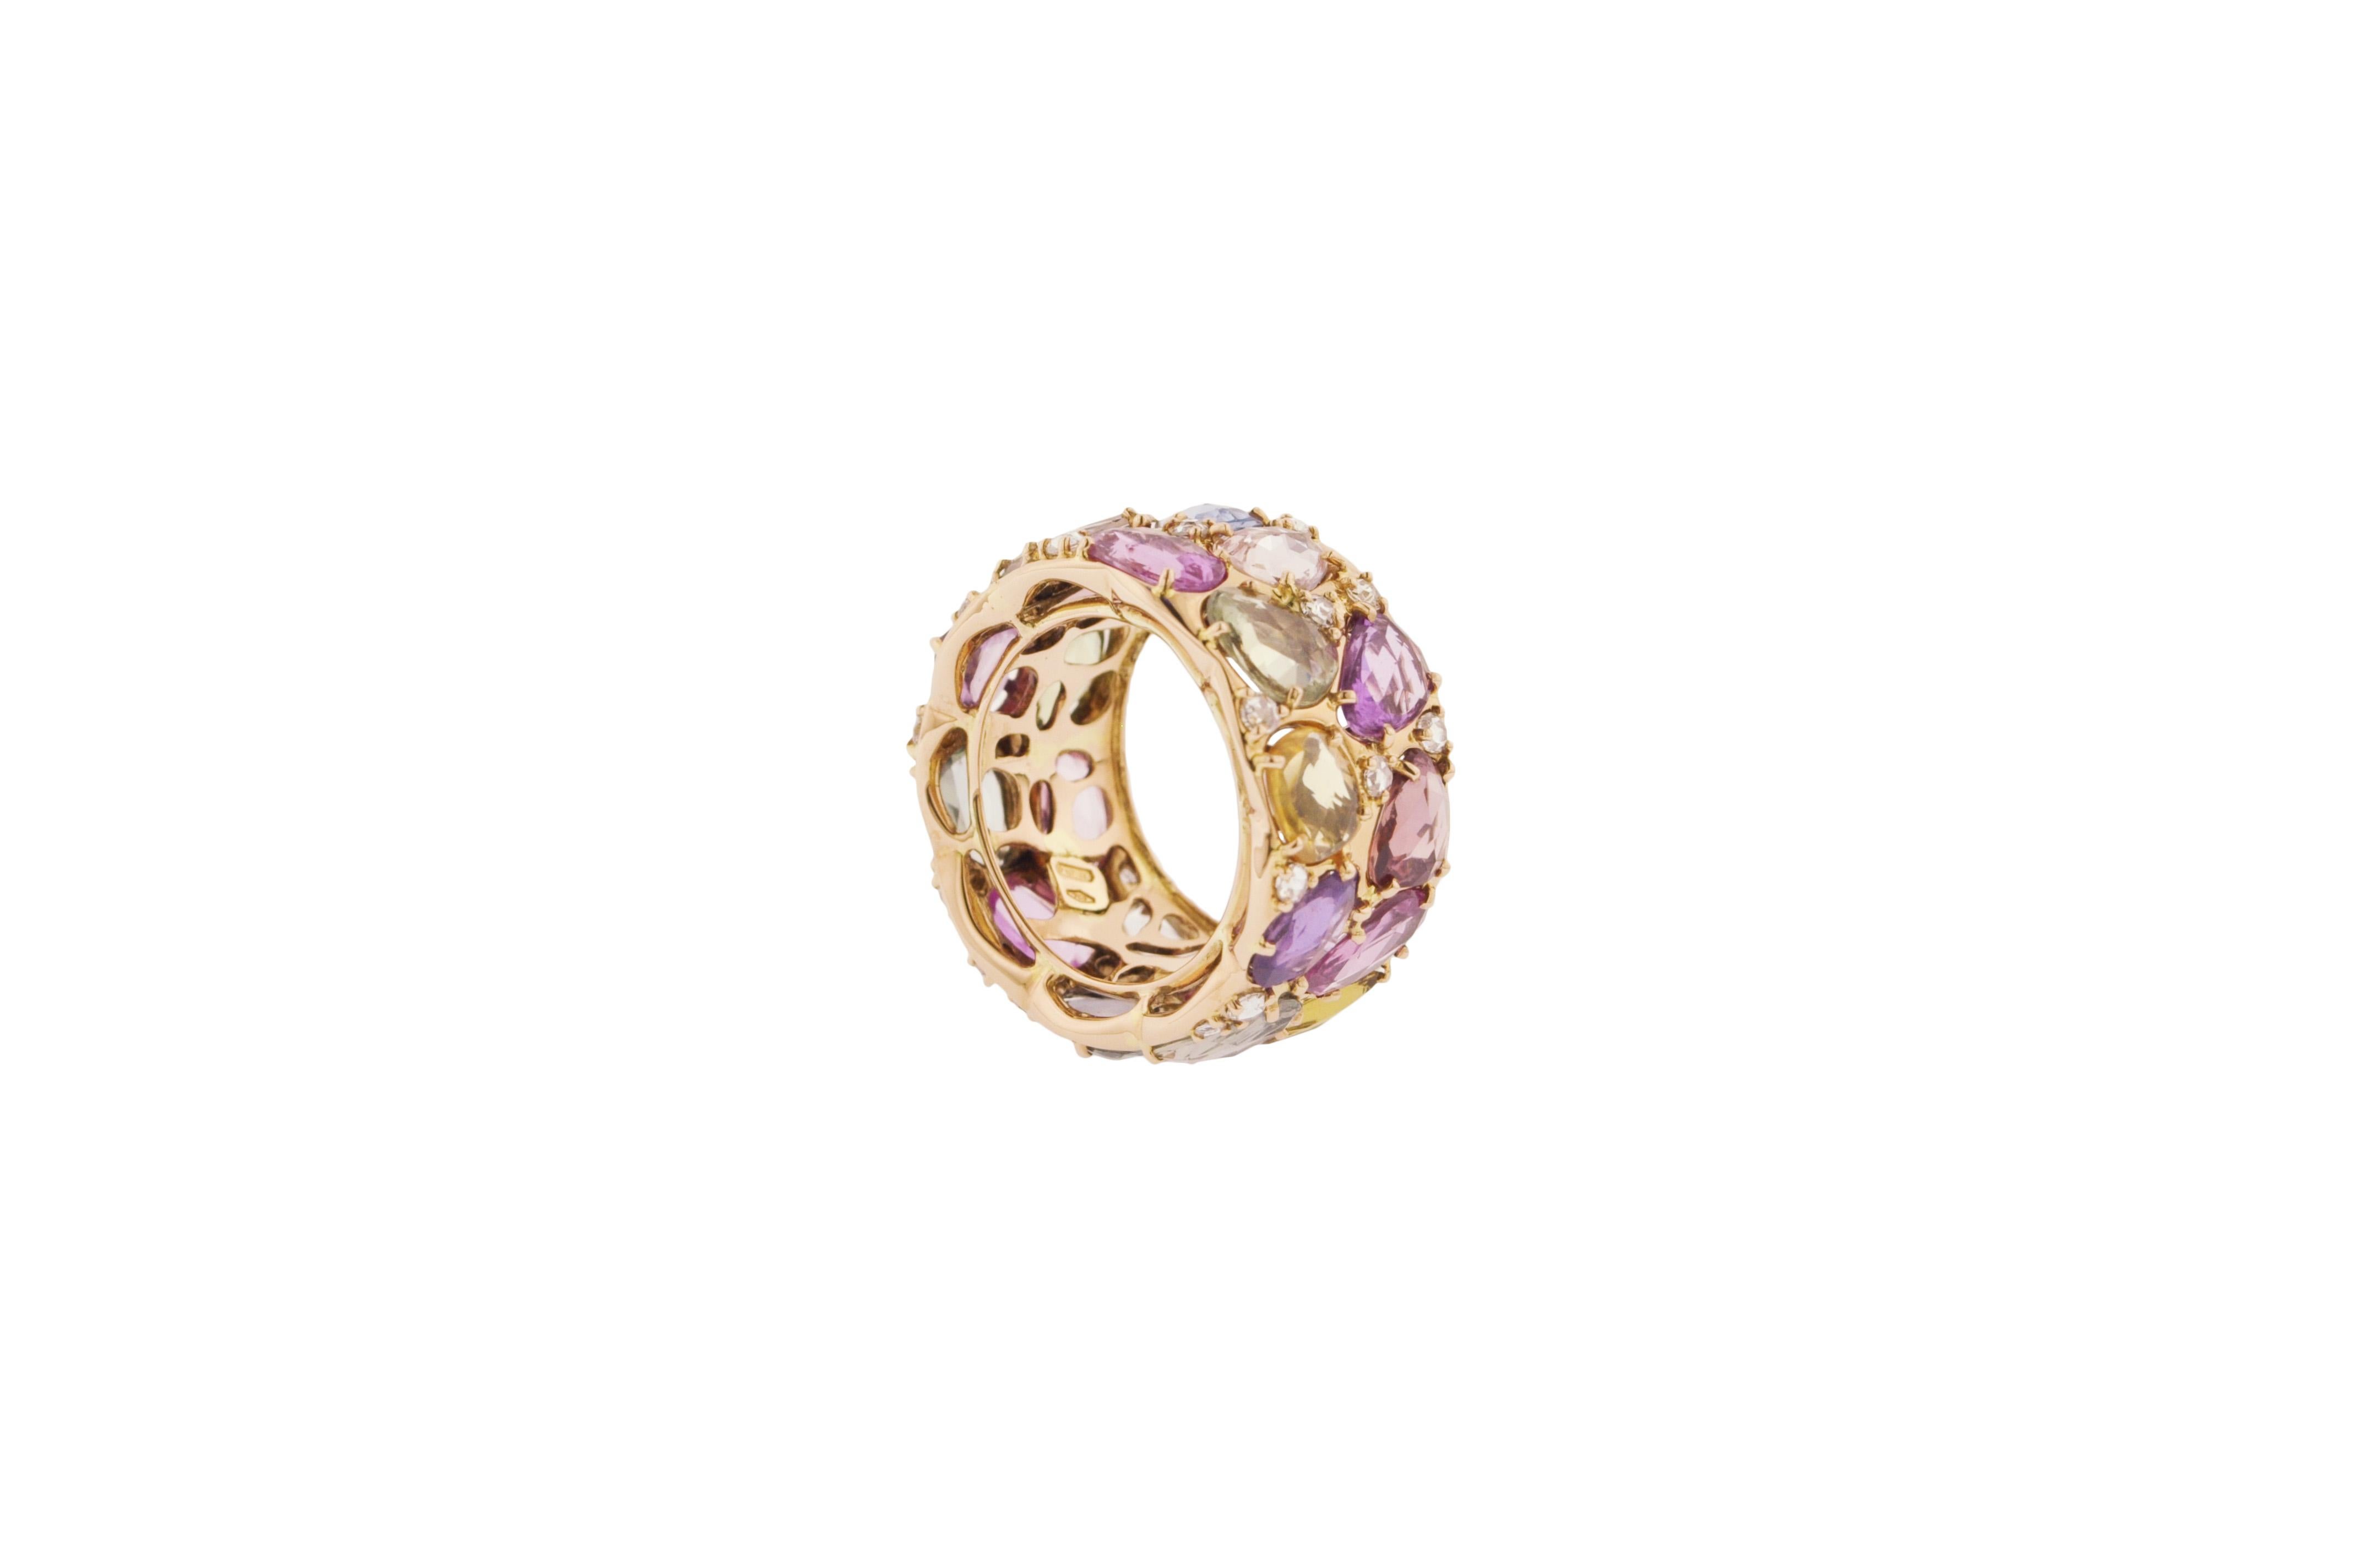 18K pink gold cocktail eternity band featuring 21 multi-color rose-cut sapphires weighing 15.16 carats and 24 rose-cut diamonds weighing 0.60 carats.

Ring size 7